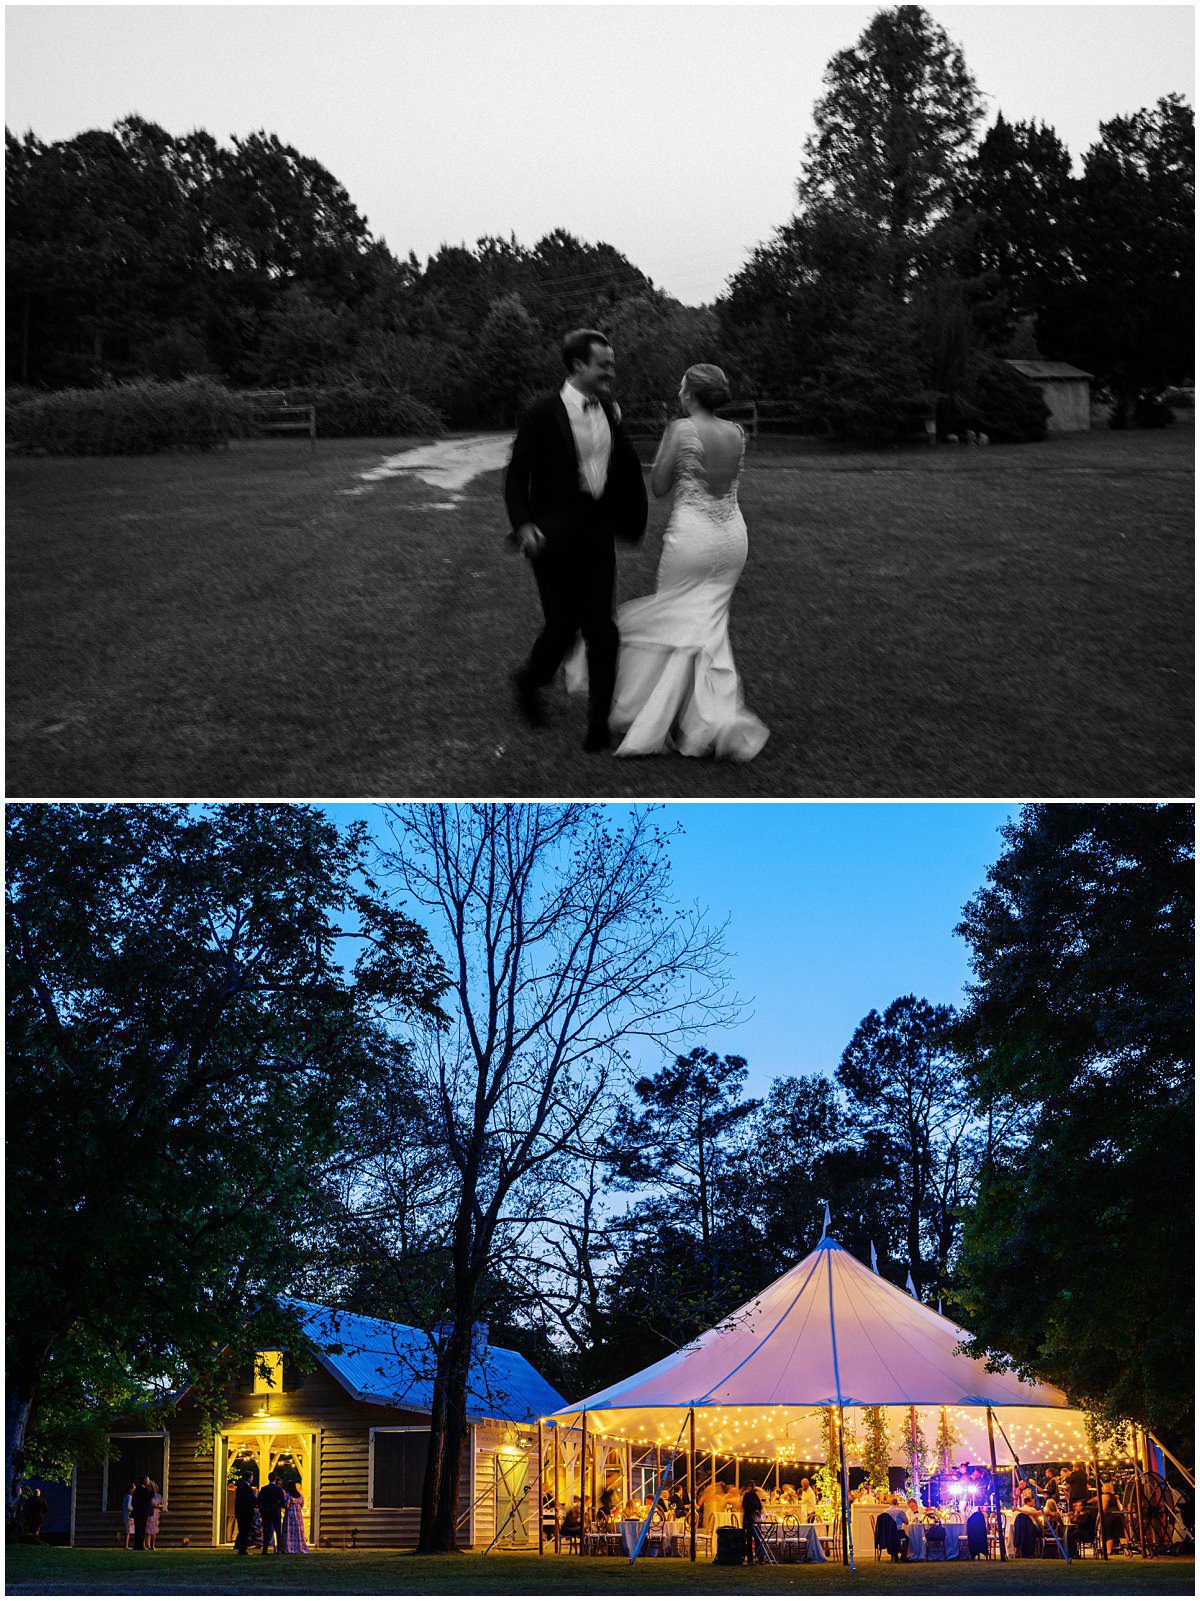 Nighttime shot of the sail cloth tent lit up at a Wavering Place wedding